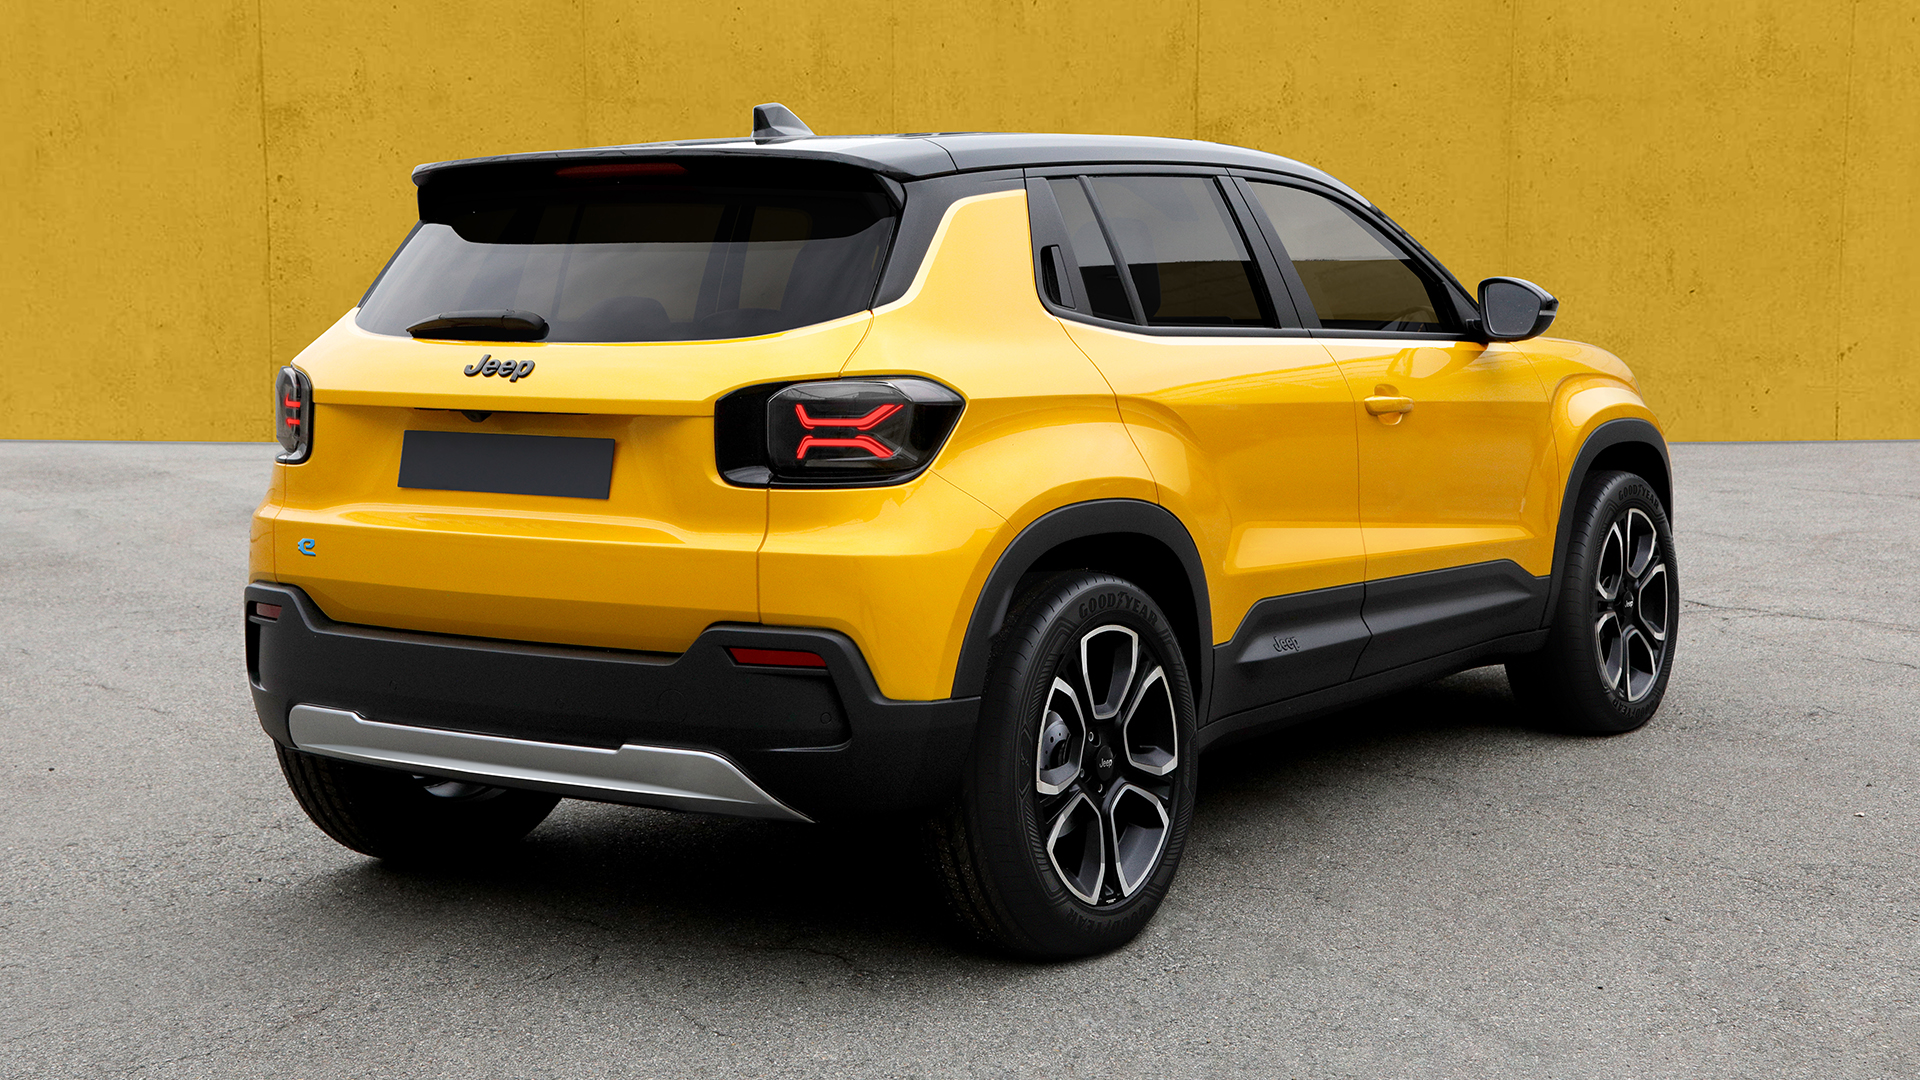 Jeep® brand reveals image of first-ever fully electric Jeep SUV